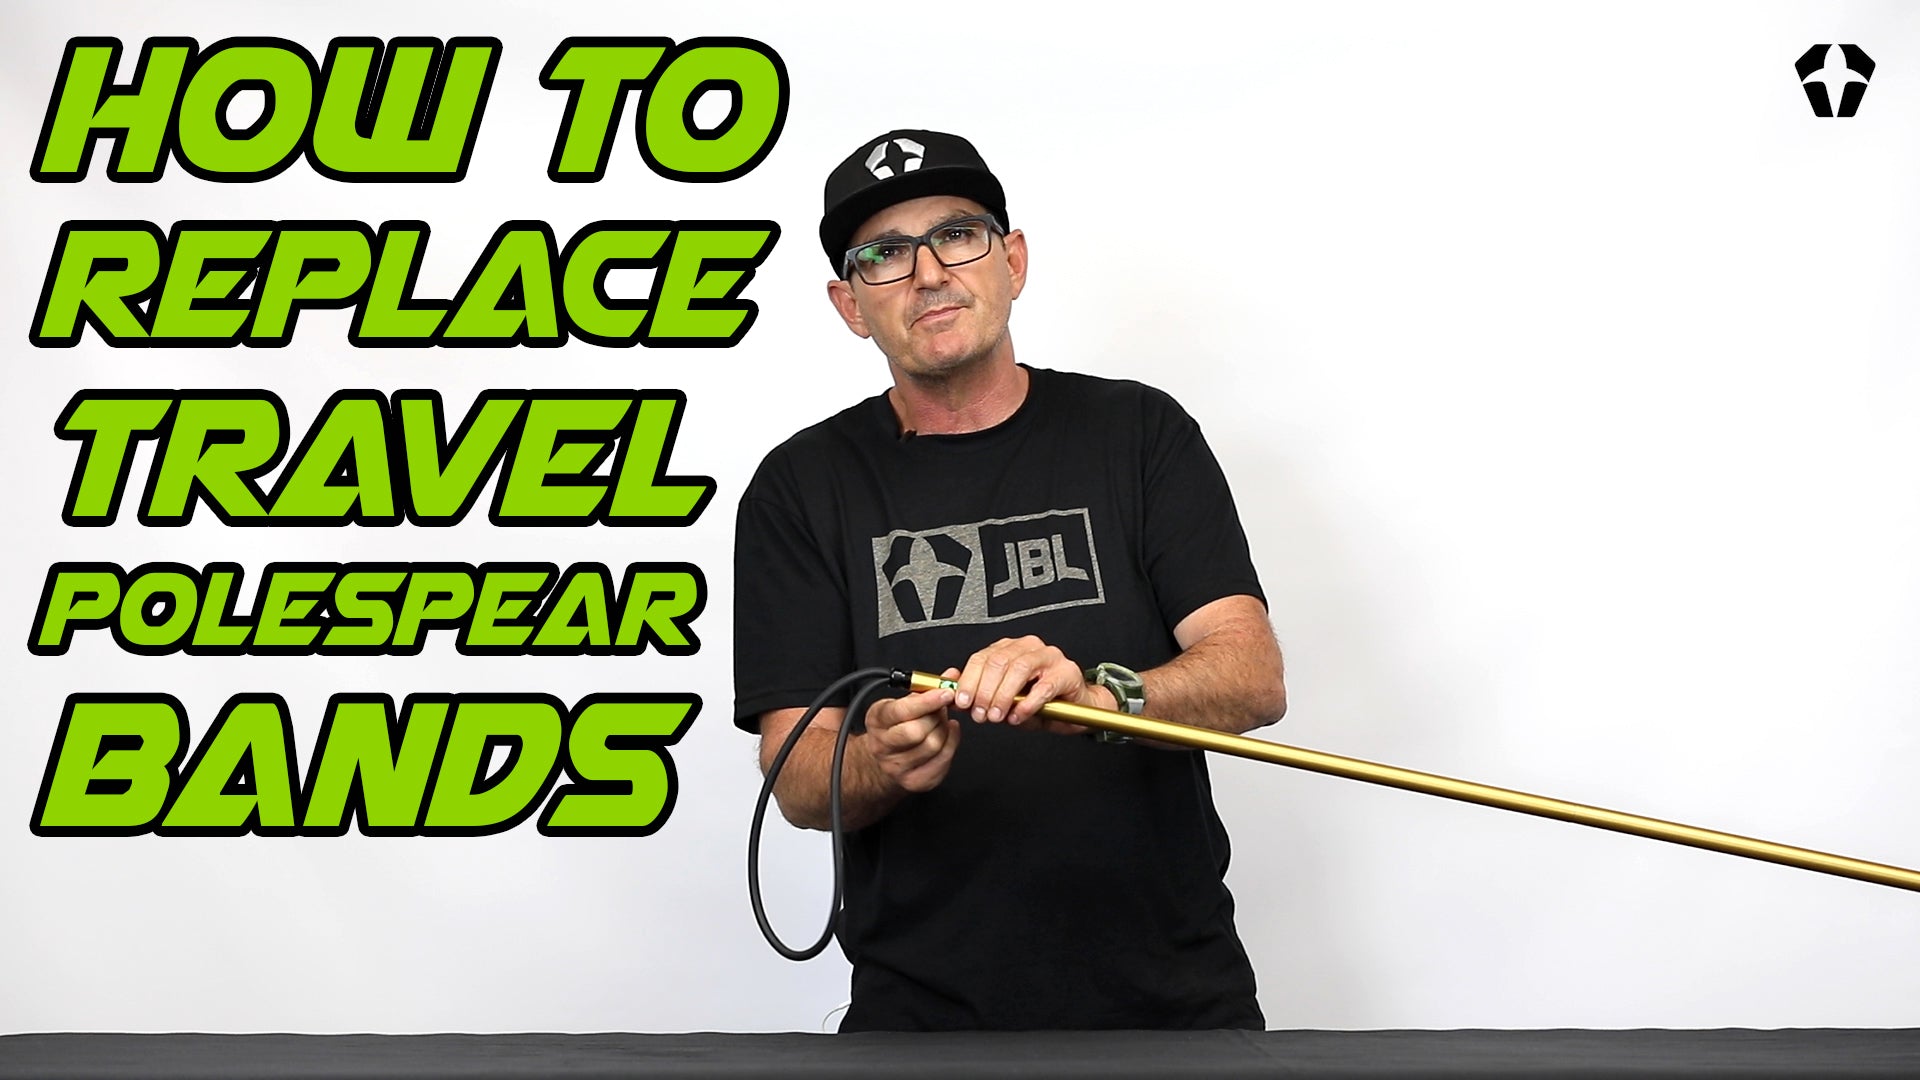 How to Replace Travel Polespear Bands